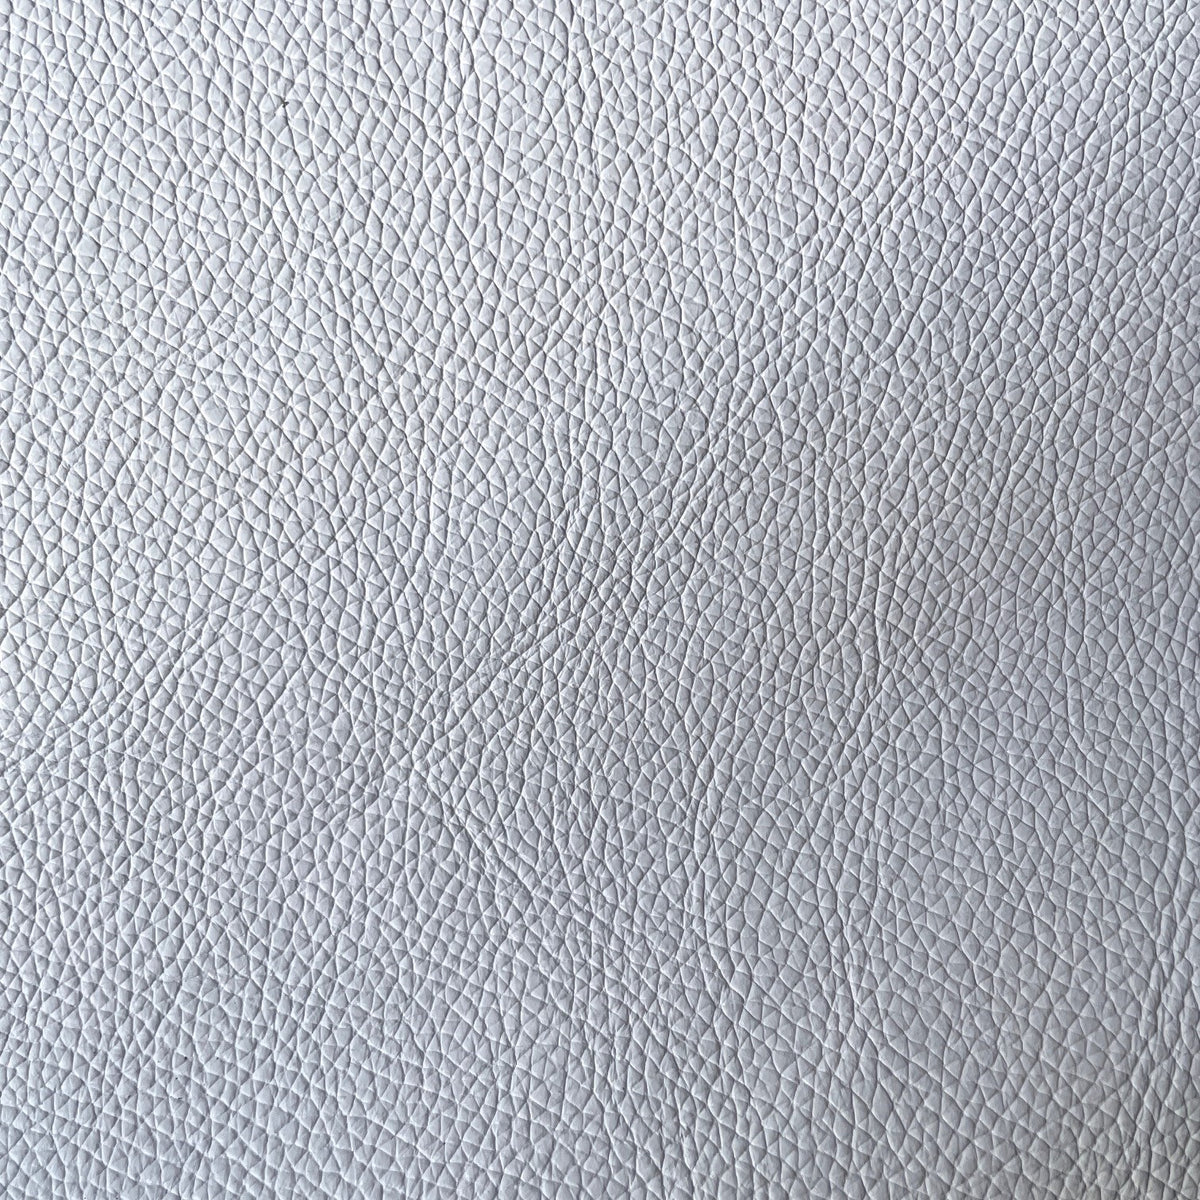 Phoenix Upholstery Cow Hide | Ice White | 1.0mm | 50 sq.ft | From $460